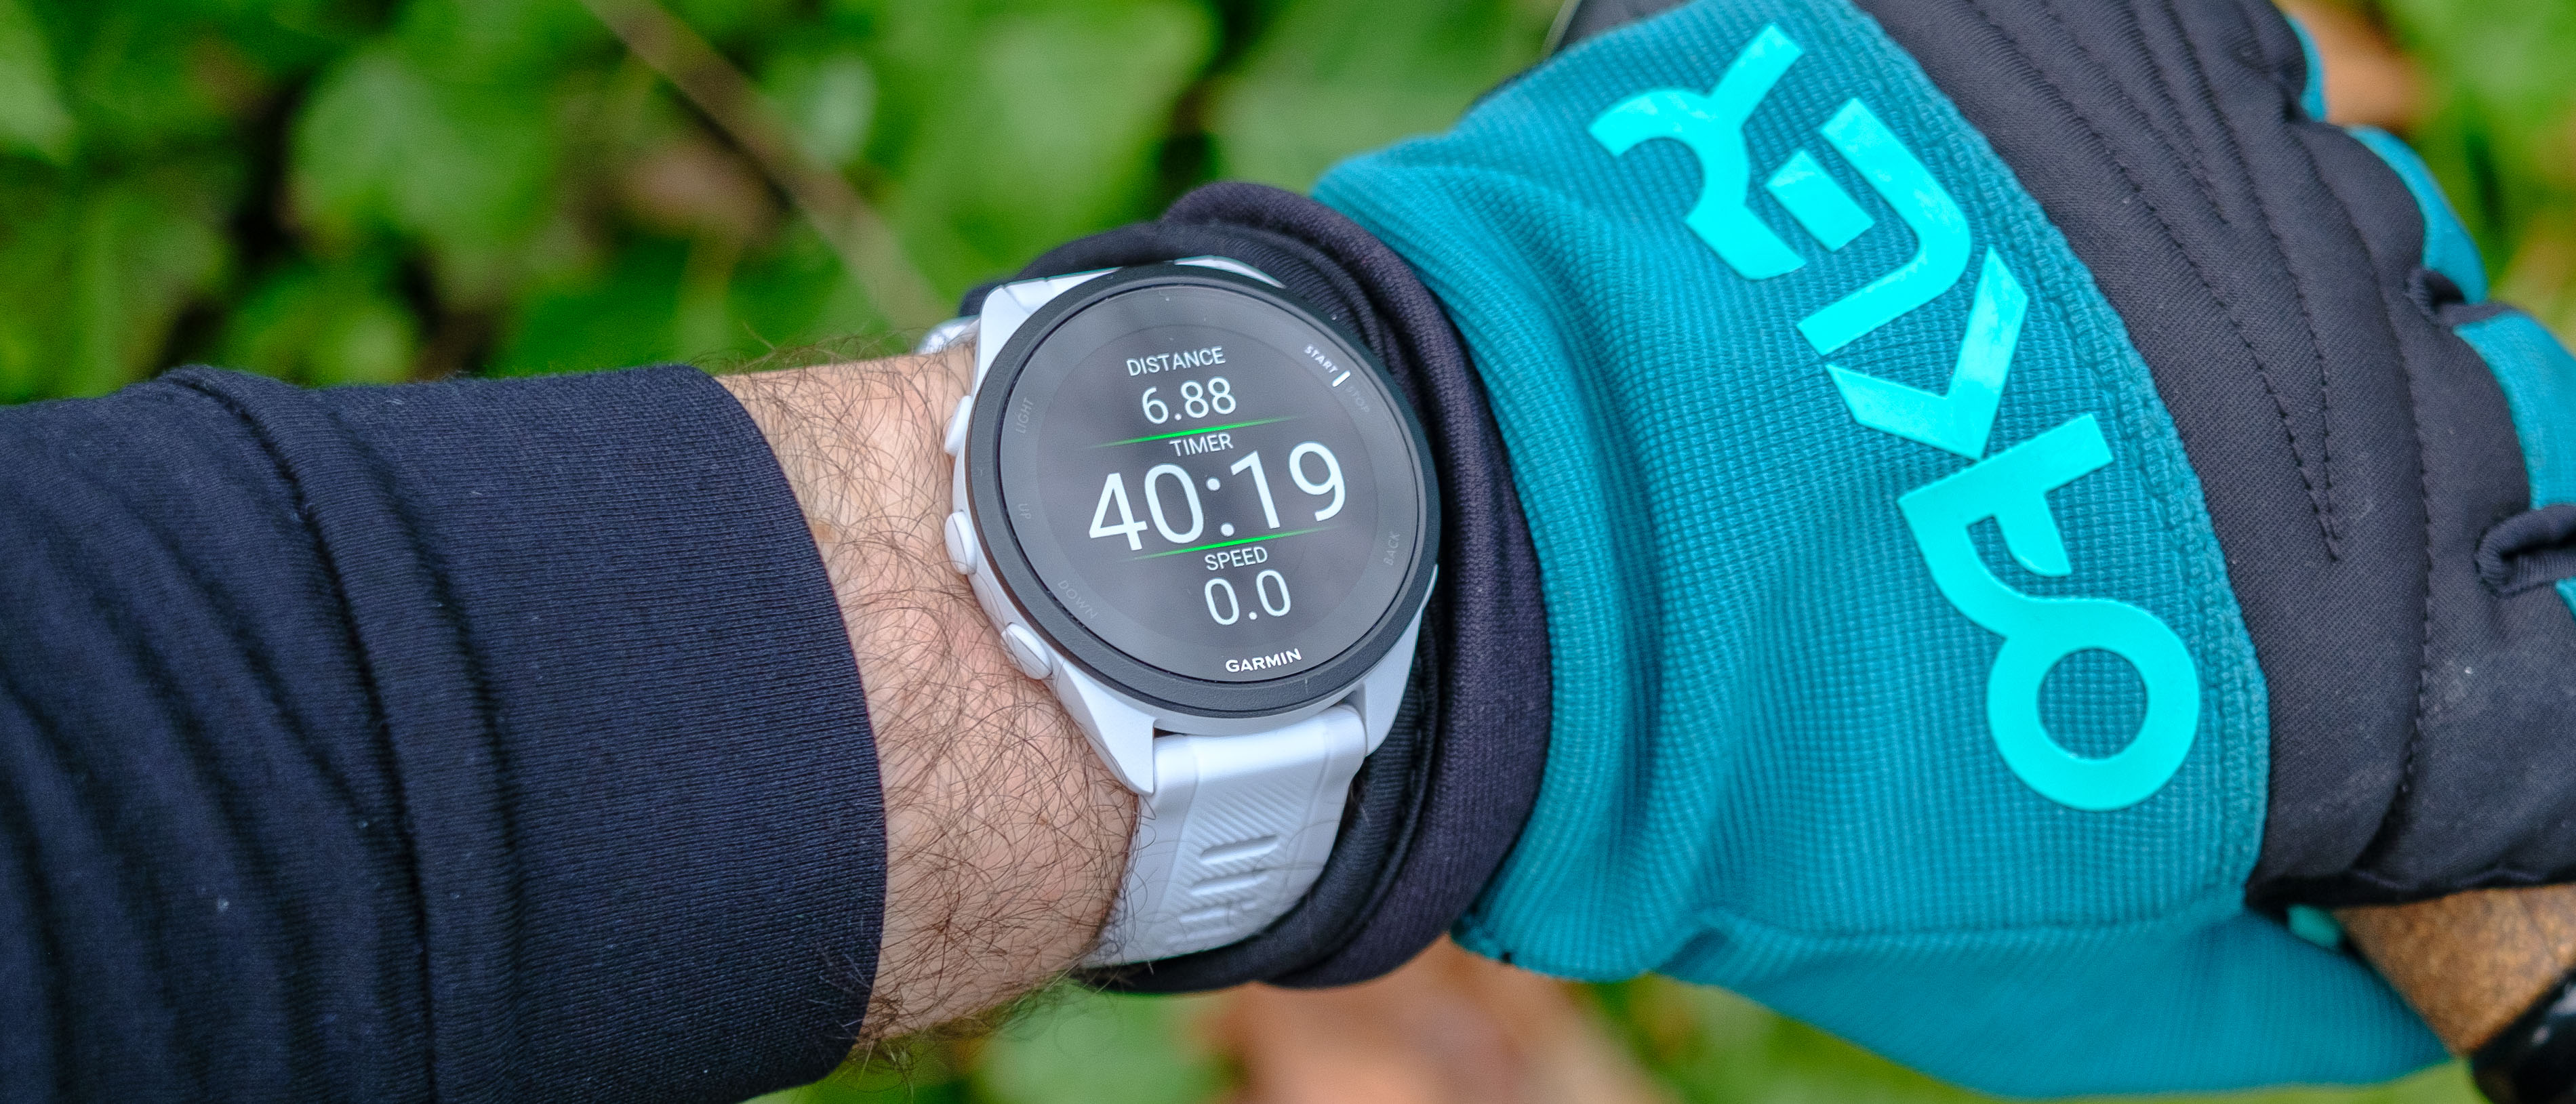 Garmin Launches Smartwatch Forerunner 165 And Monitors HRM-Fit Heart Rate  For Women